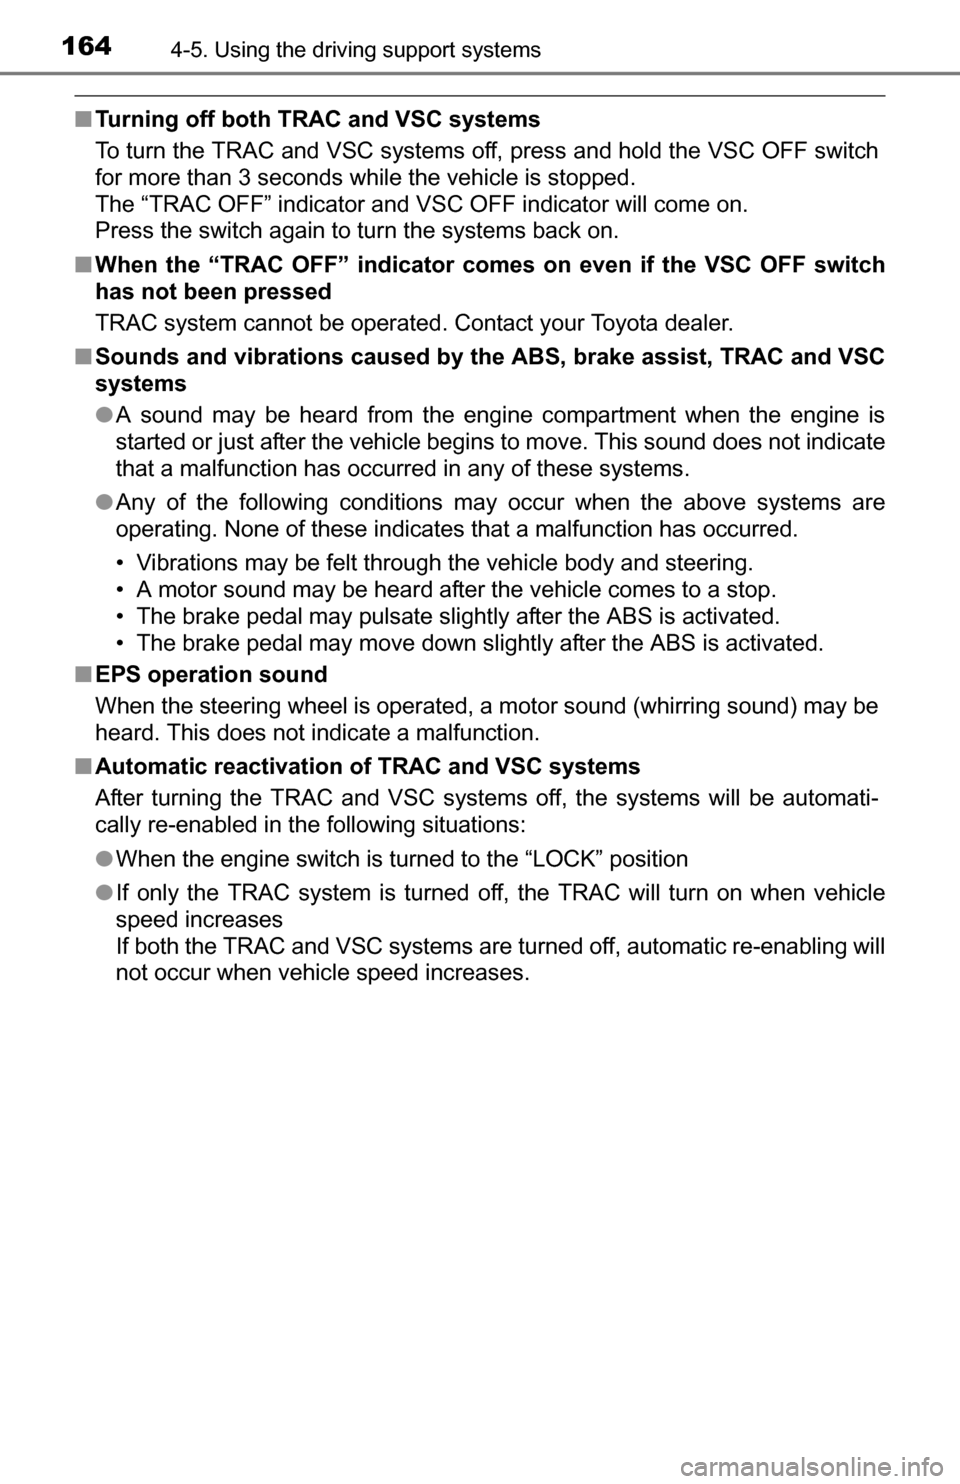 TOYOTA YARIS 2016 3.G Owners Manual 1644-5. Using the driving support systems
■Turning off both TRAC and VSC systems
To turn the TRAC and VSC systems off, press and hold the VSC OFF switch
for more than 3 seconds while the vehicle is 